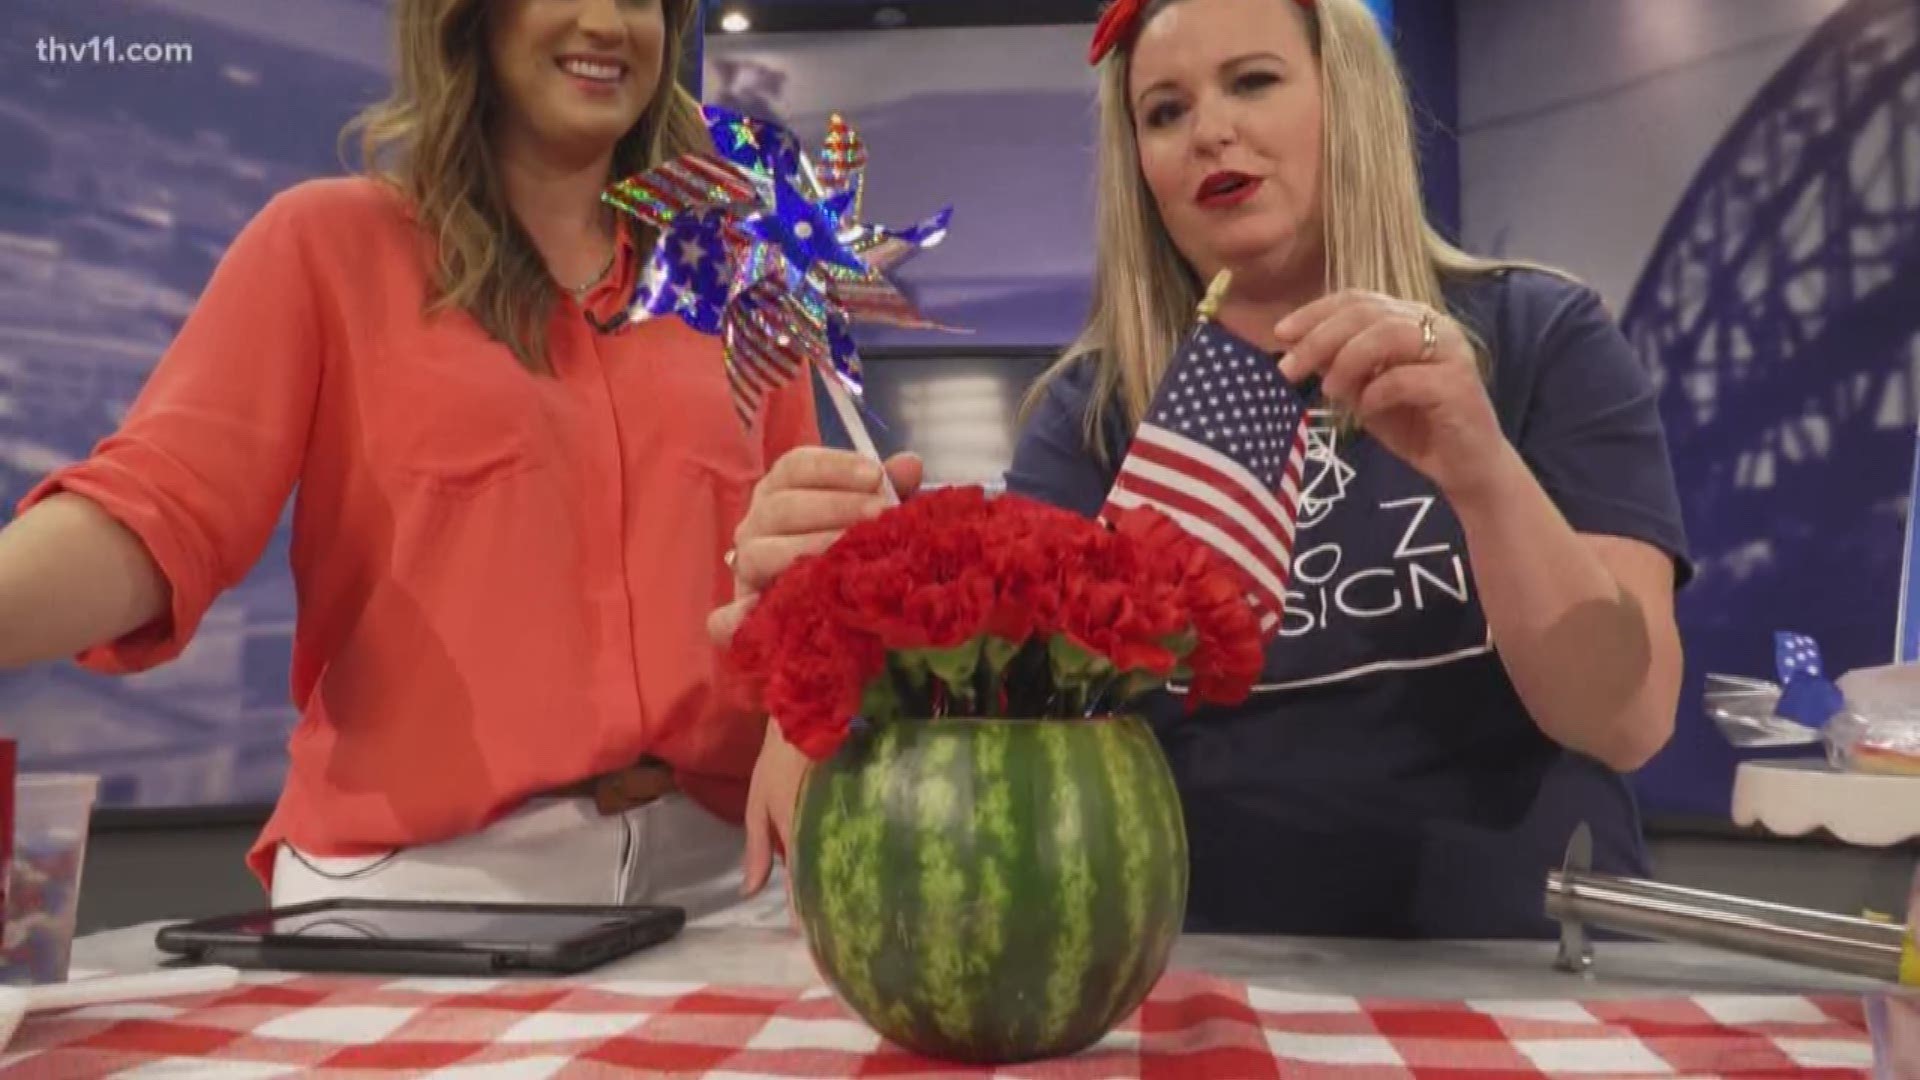 Krista Ryken is back in the studio to share how to create some easy, festive decor for your home or party.